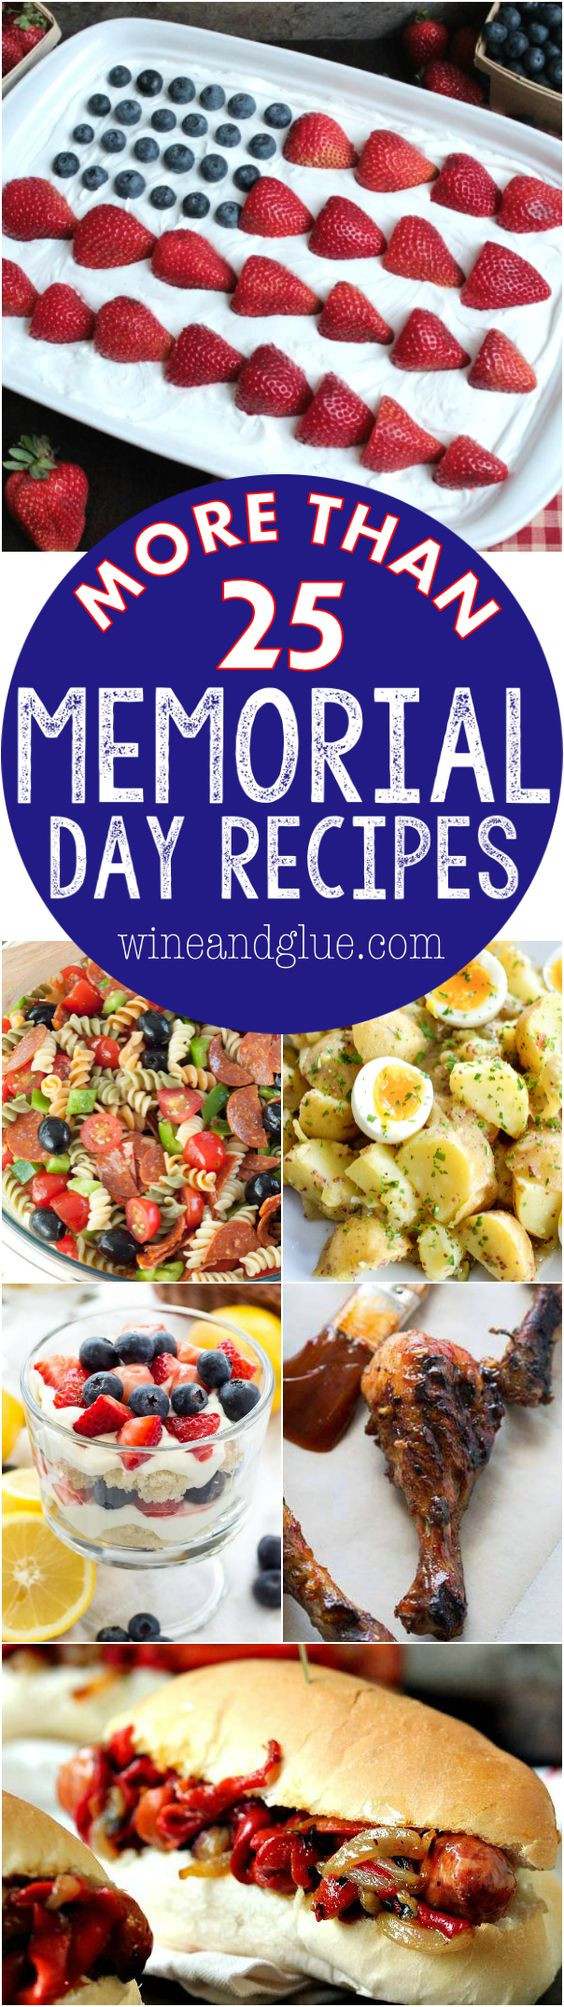 Memorial Day Food Recipes
 More than 25 Memorial Day Recipes to start your summer off